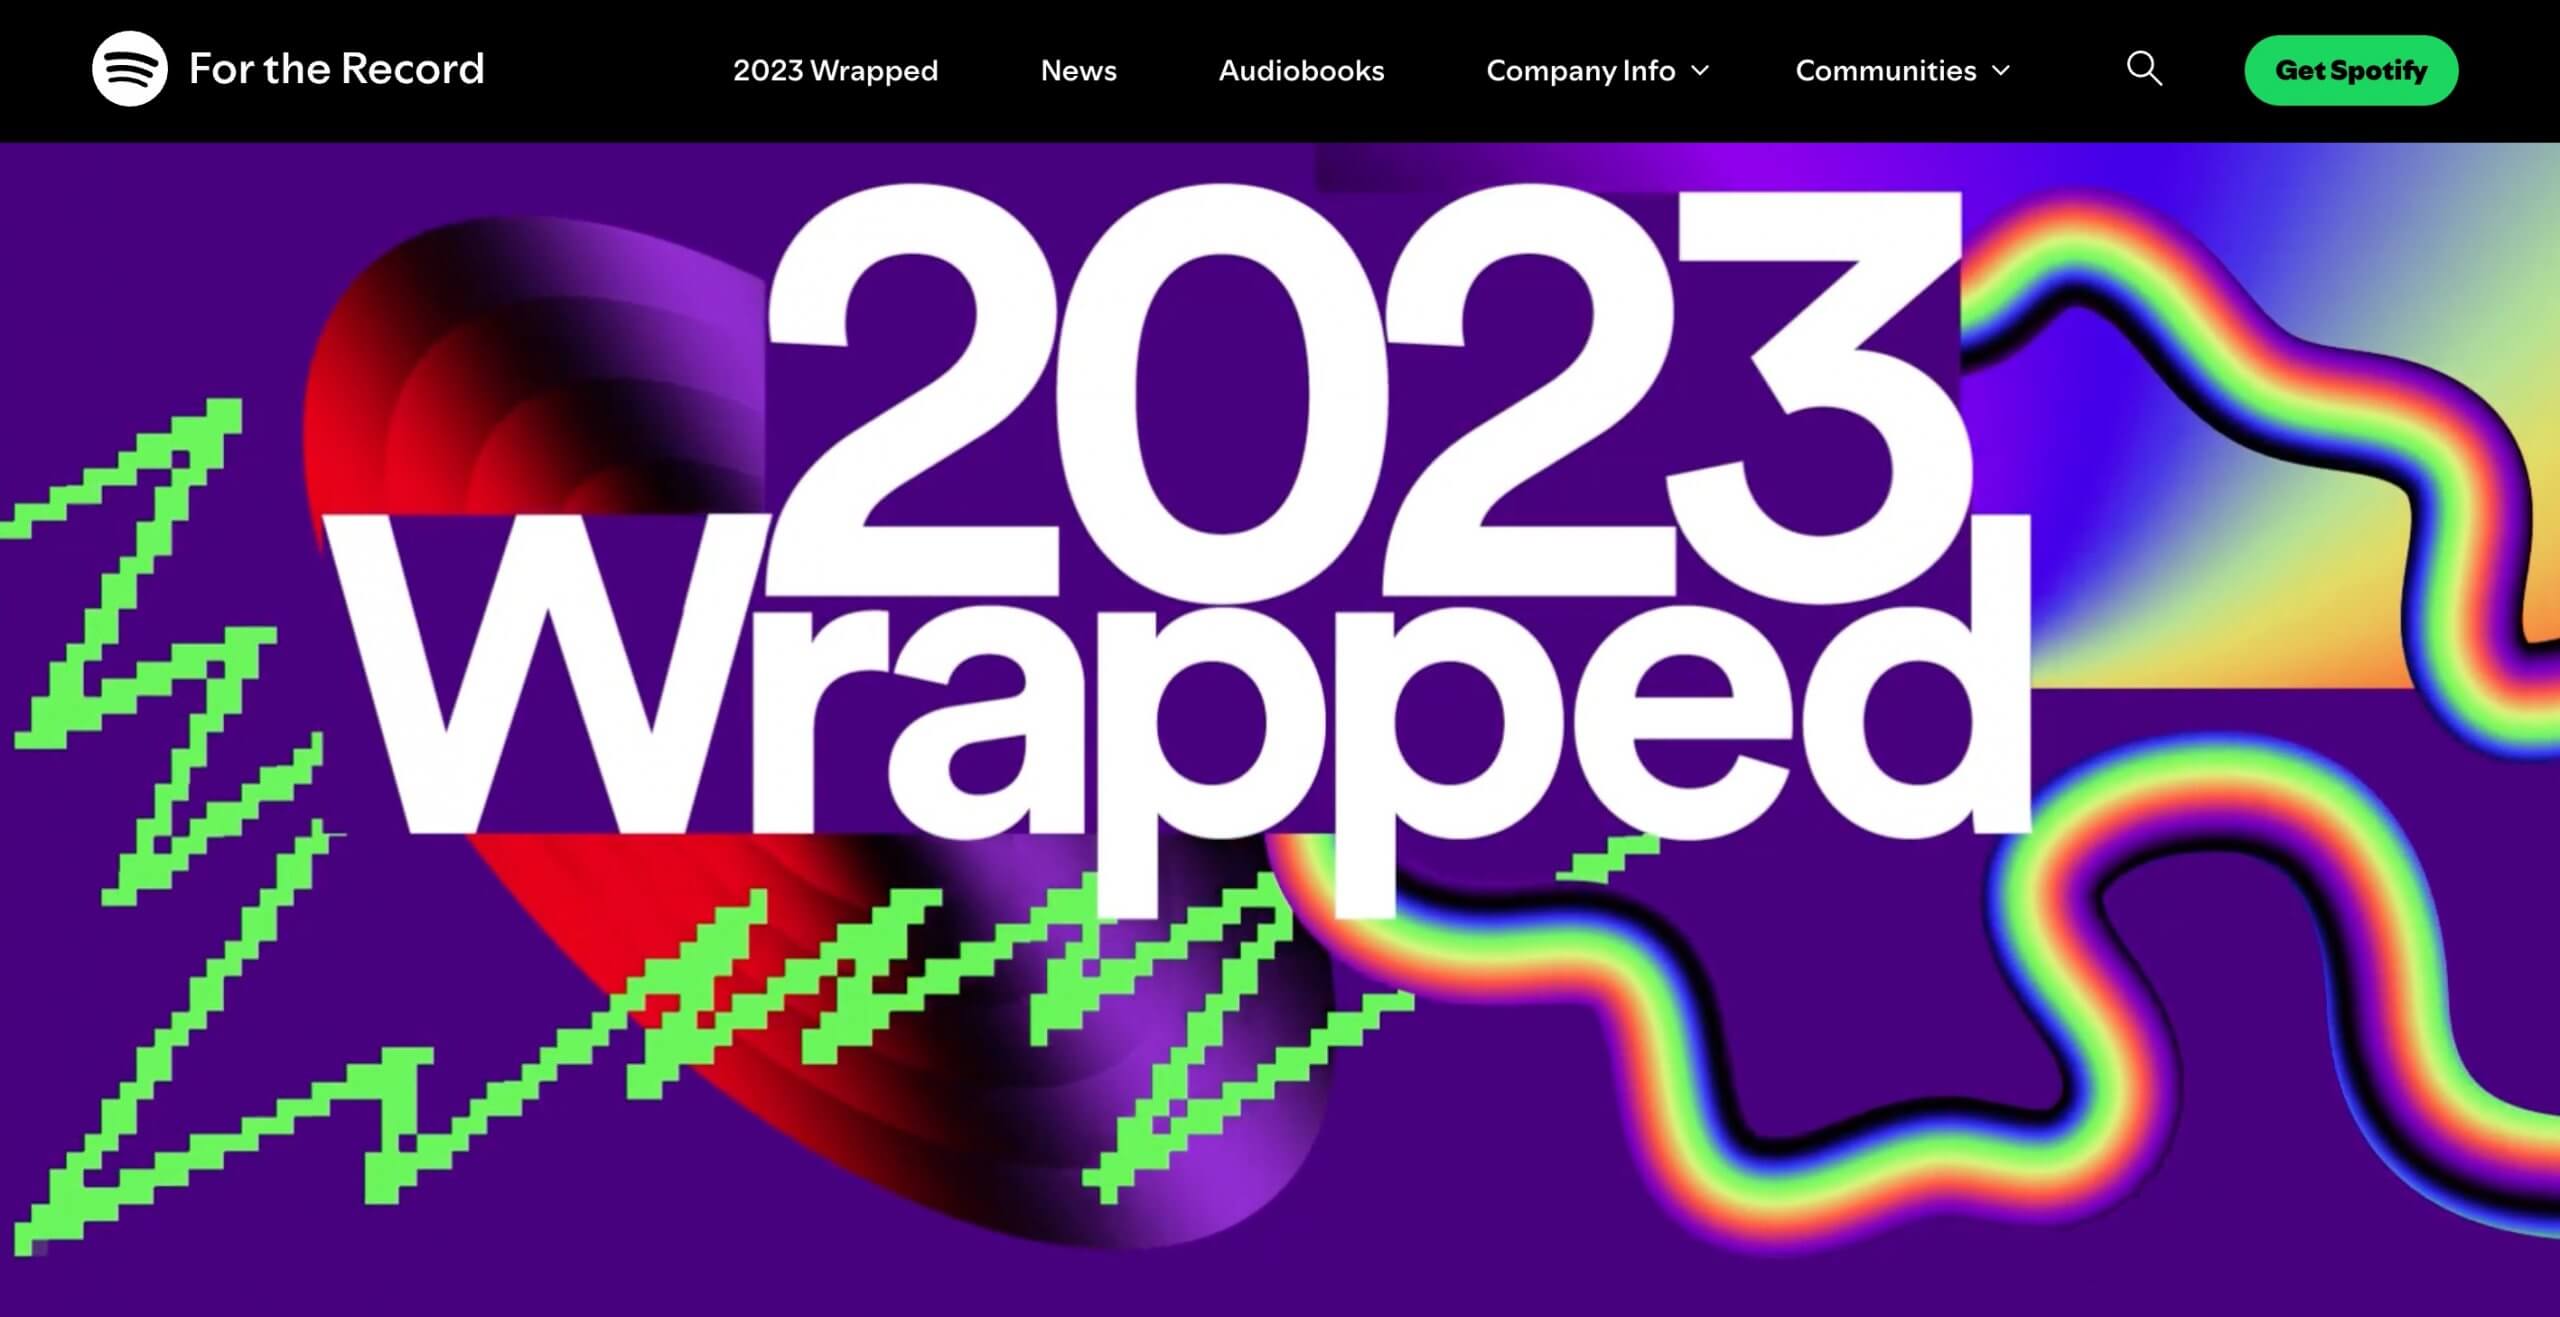 Spotify 2023 Wrapped campaign